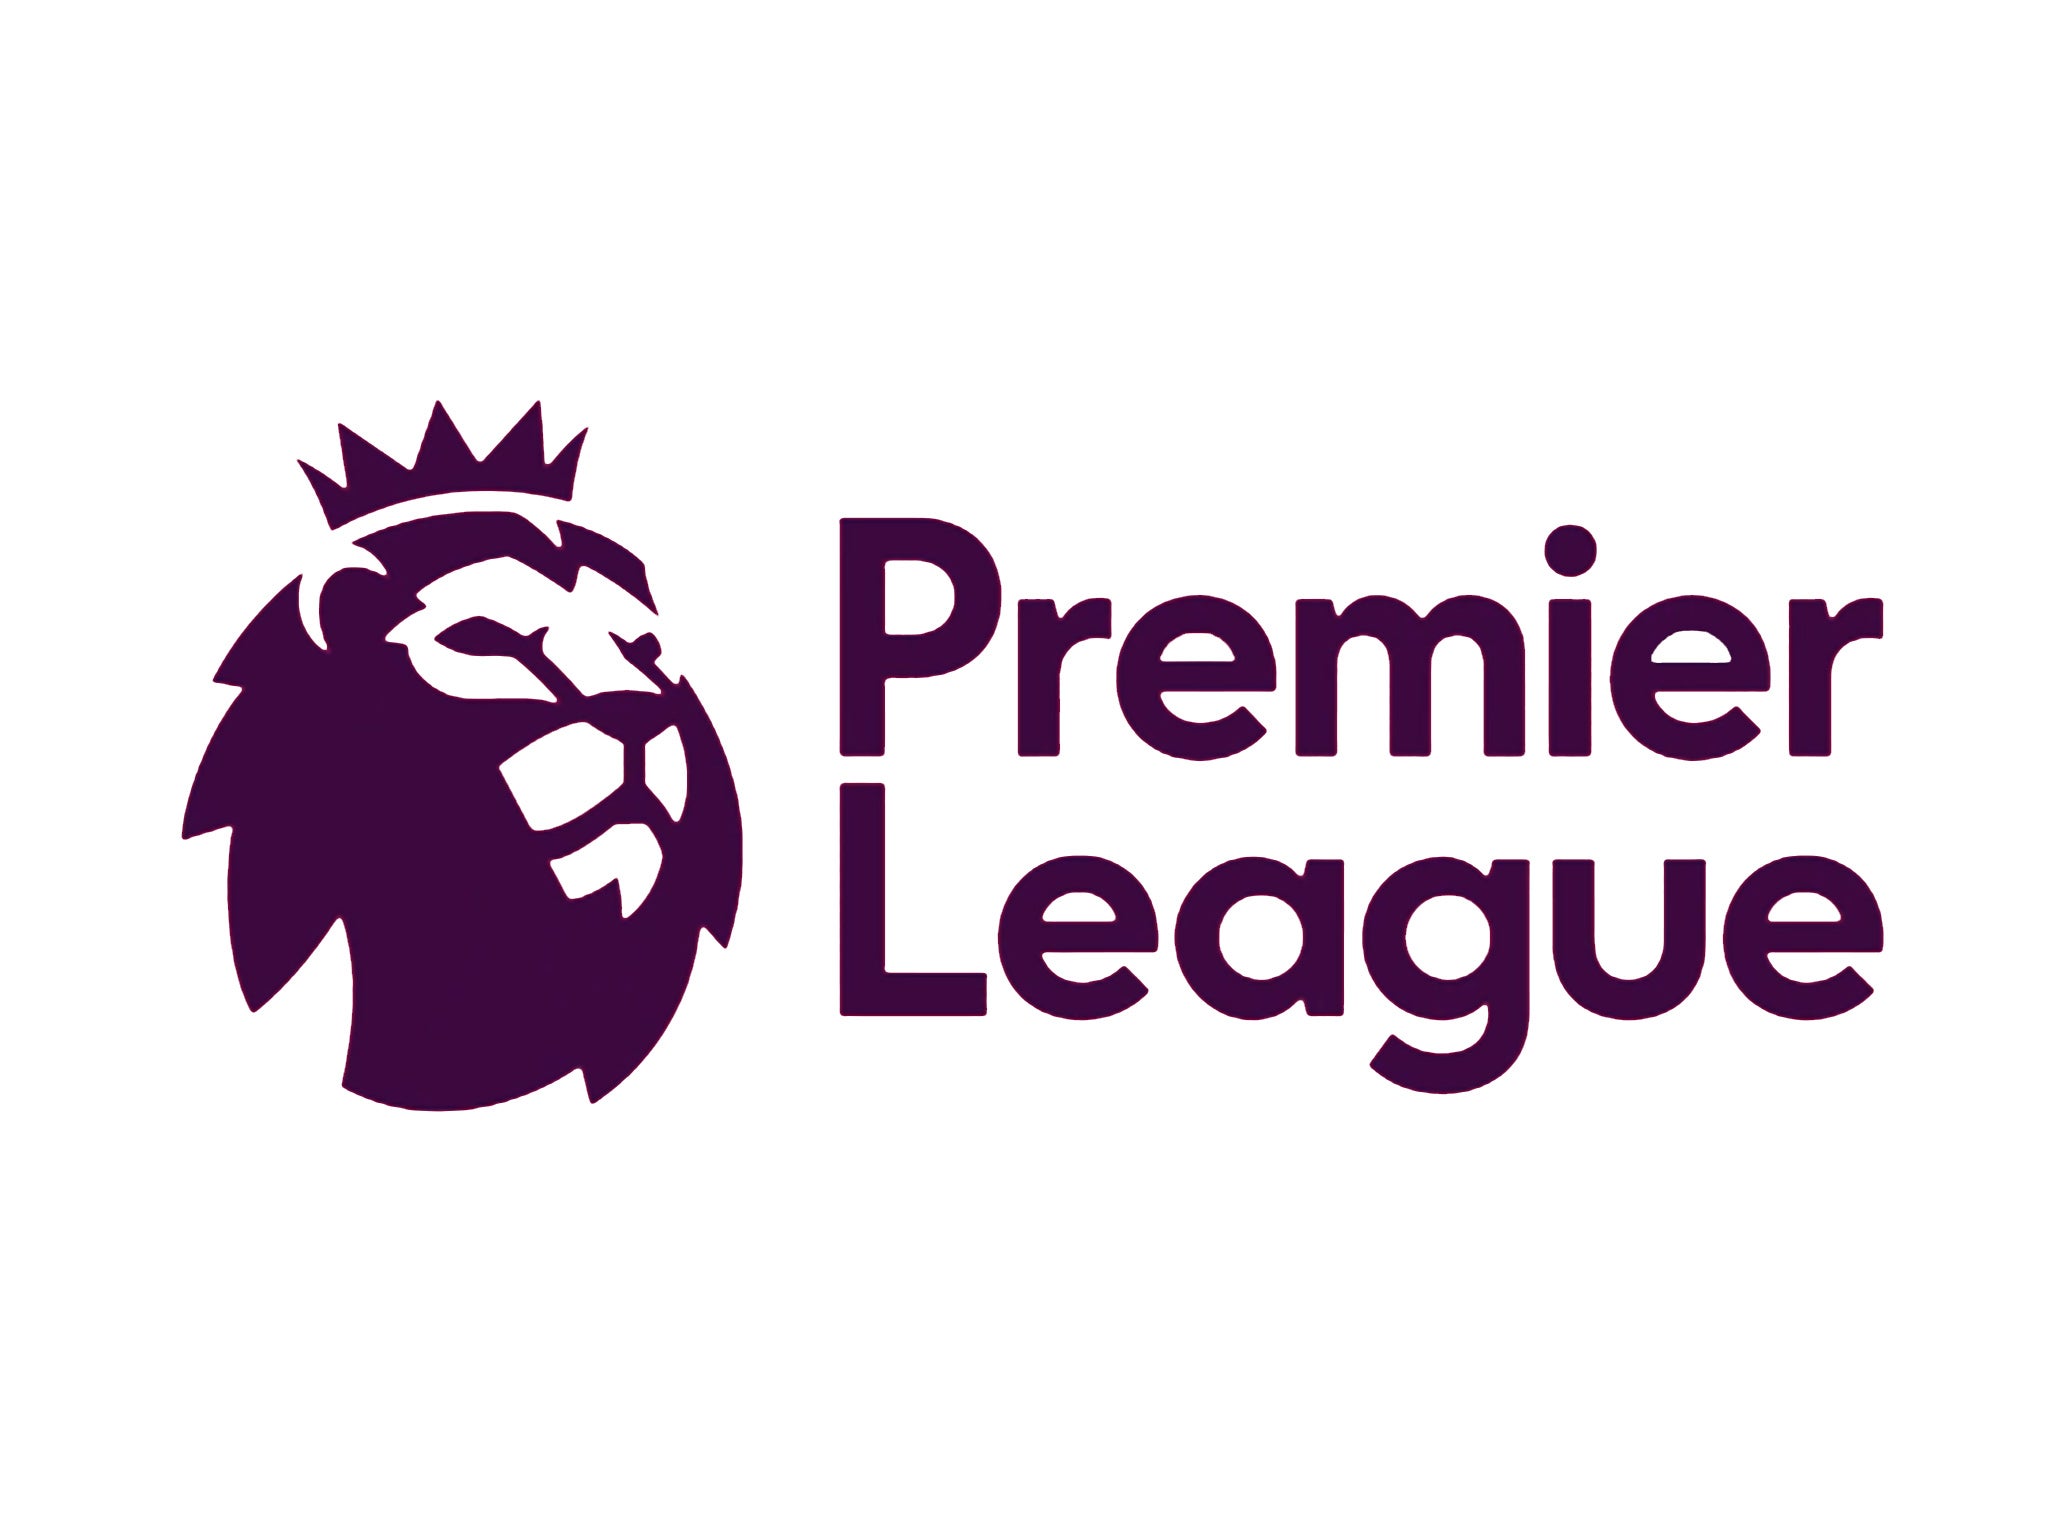 Premier League logo Blimey! The new design is sleek, clean and clever